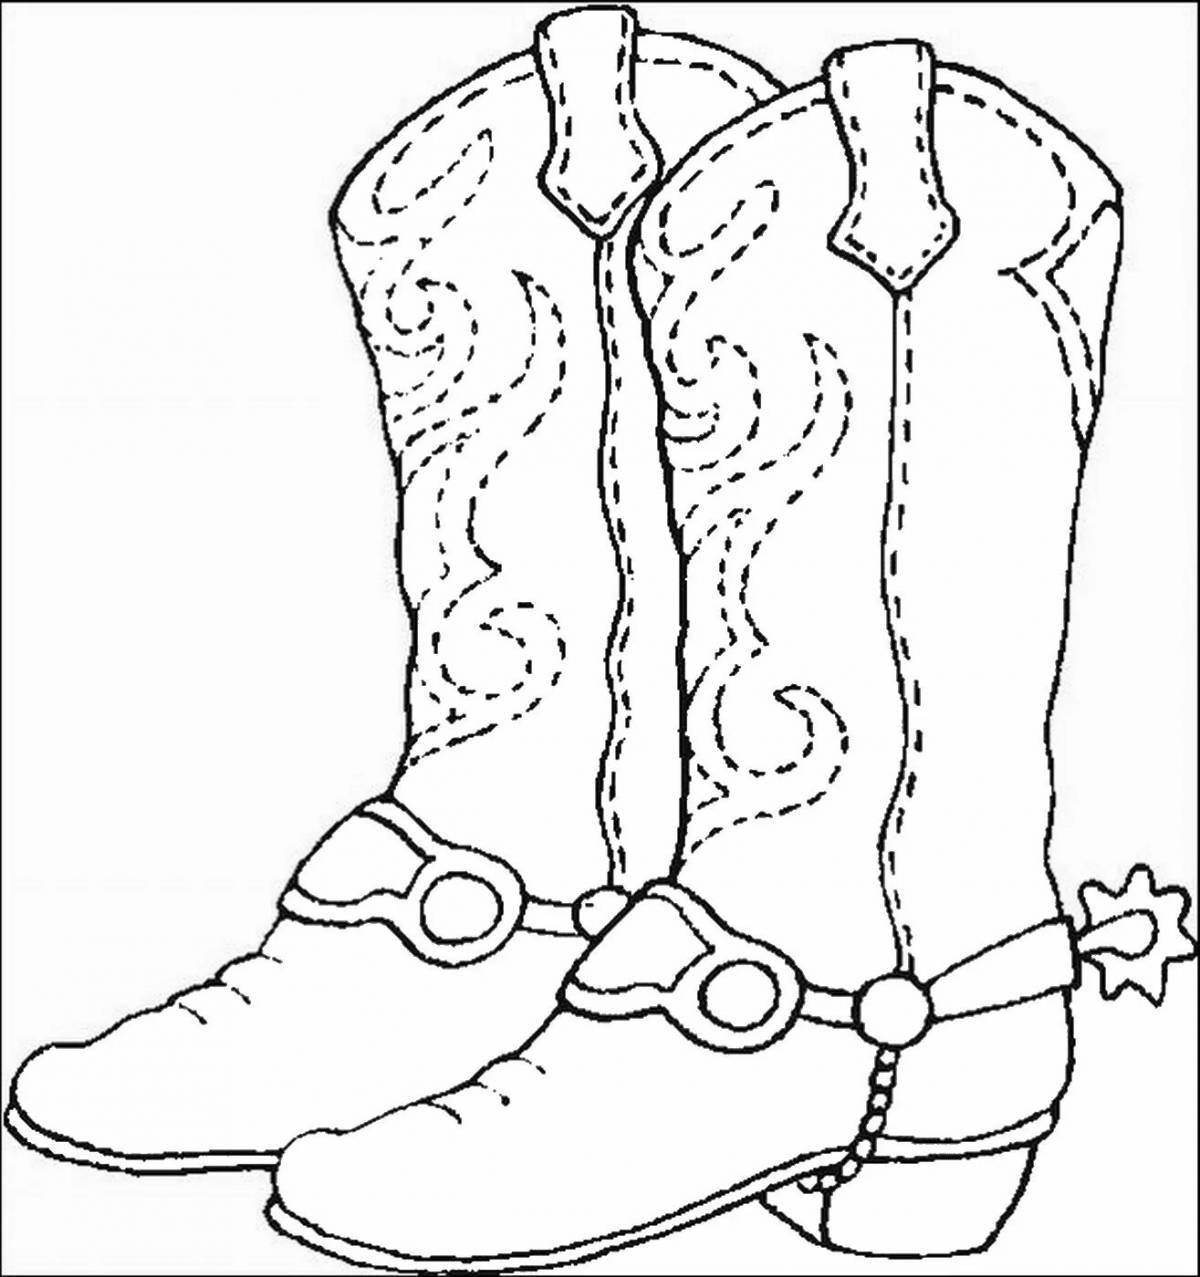 Coloring merry tatar boot